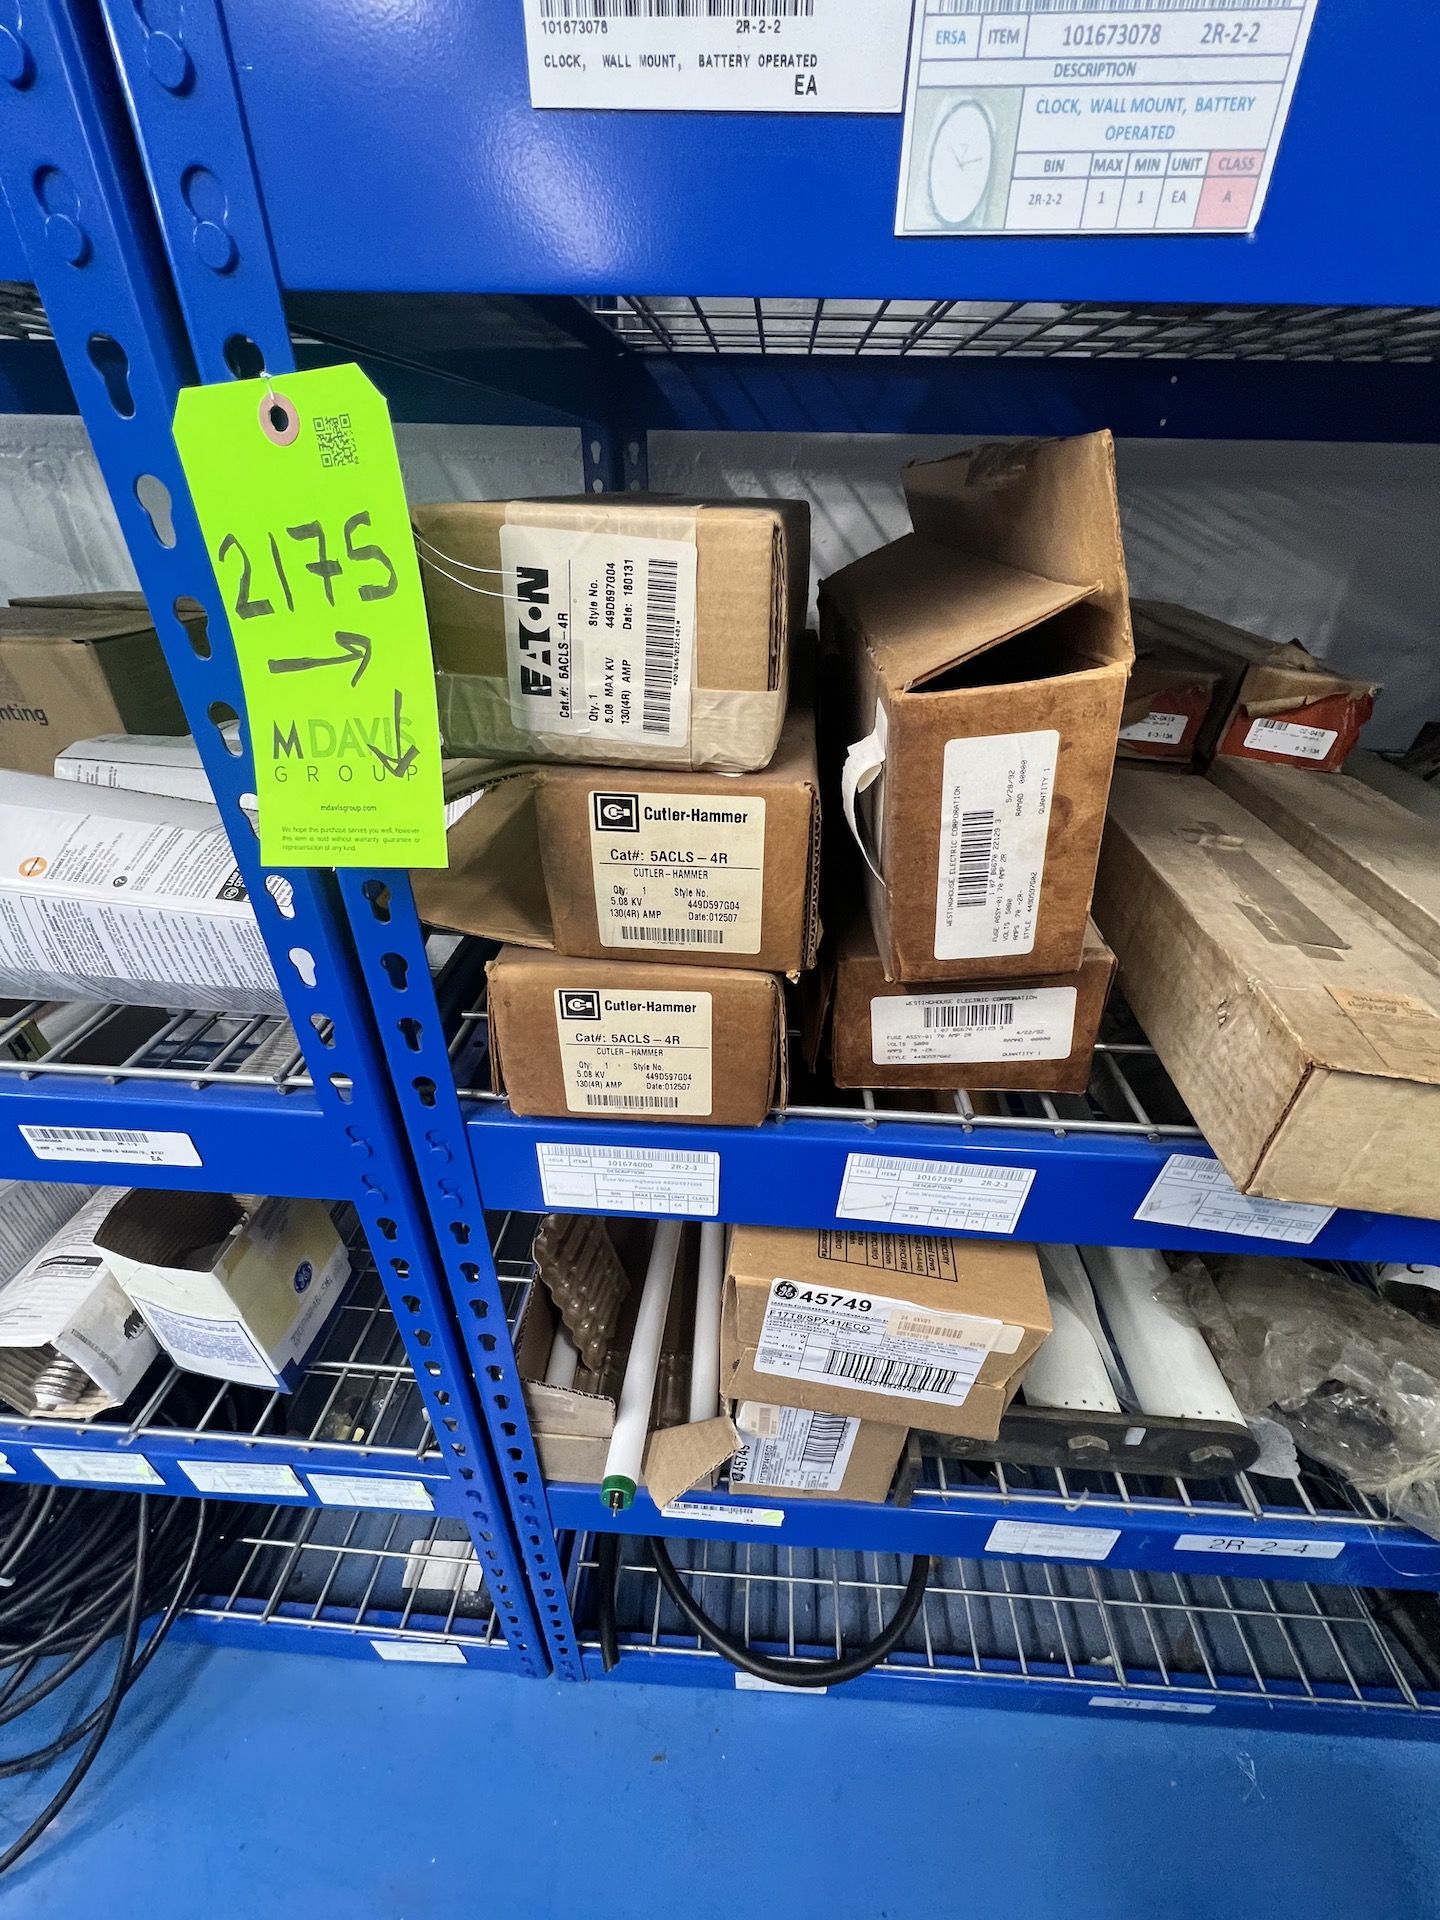 ASSORTED ELECTRICAL SUPPLIES AND MRO, INCLUDES FUSES, VACUUM INTERRUPTERS, FUSISTORS AND MORE - Image 17 of 27